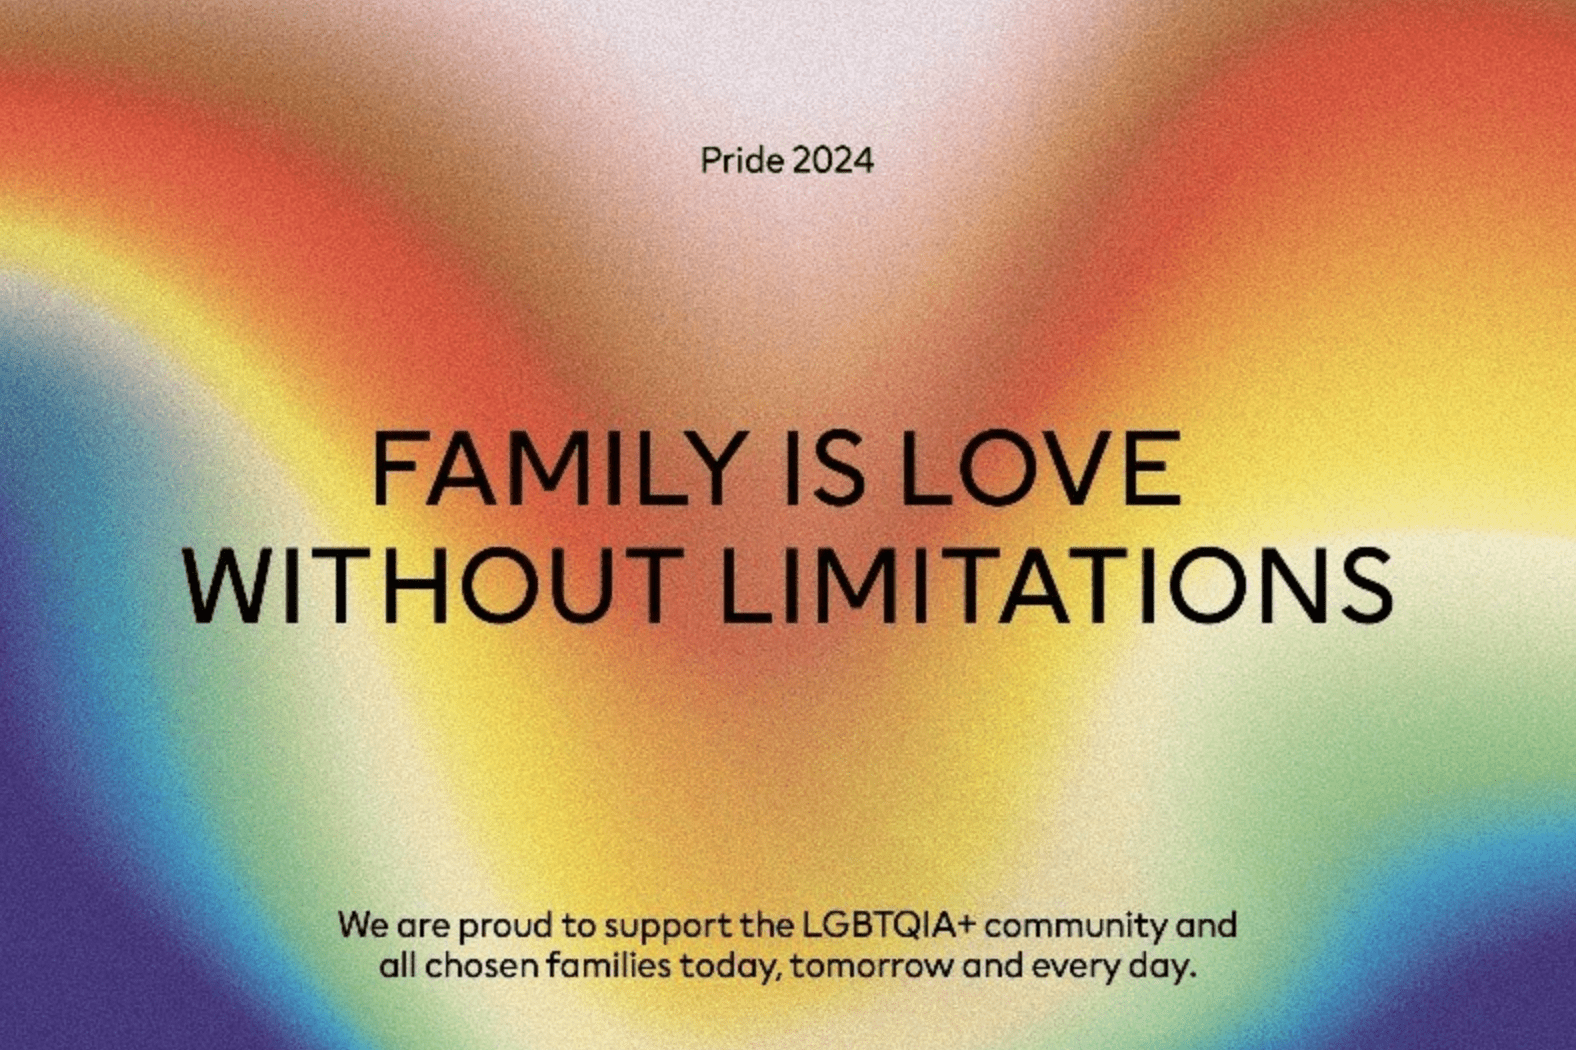 A rainbow background with the header "Family is Love Without Limitation."